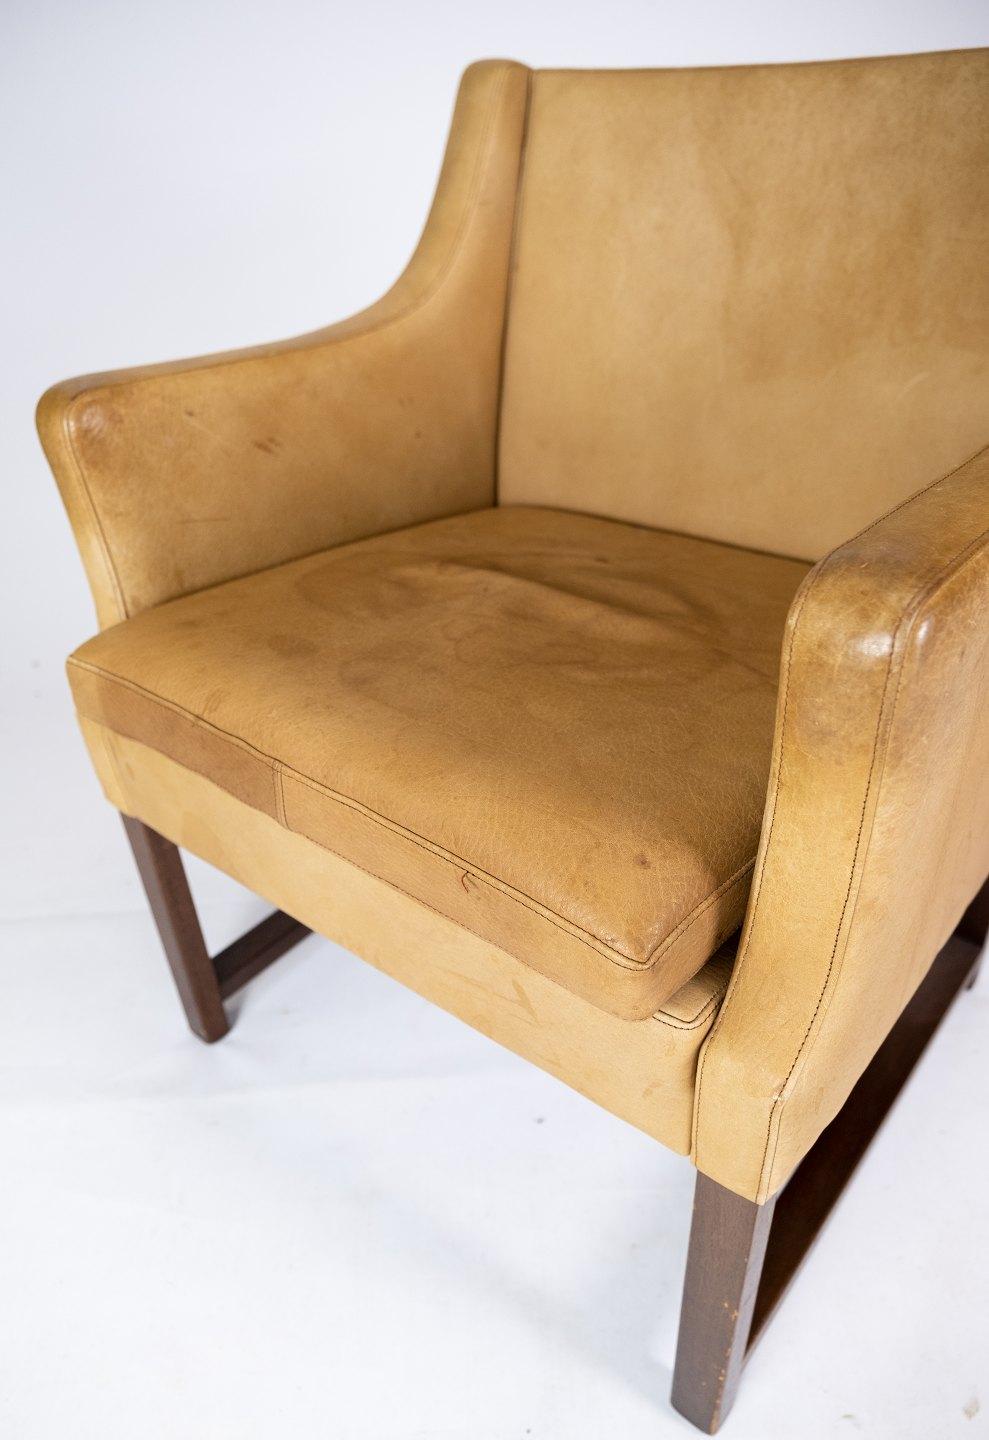 Armchair, model 3246, upholstered with light leather and frame of dark wood designed by Børge Mogensen from the 1960s. The chair is in great vintage condition.
 